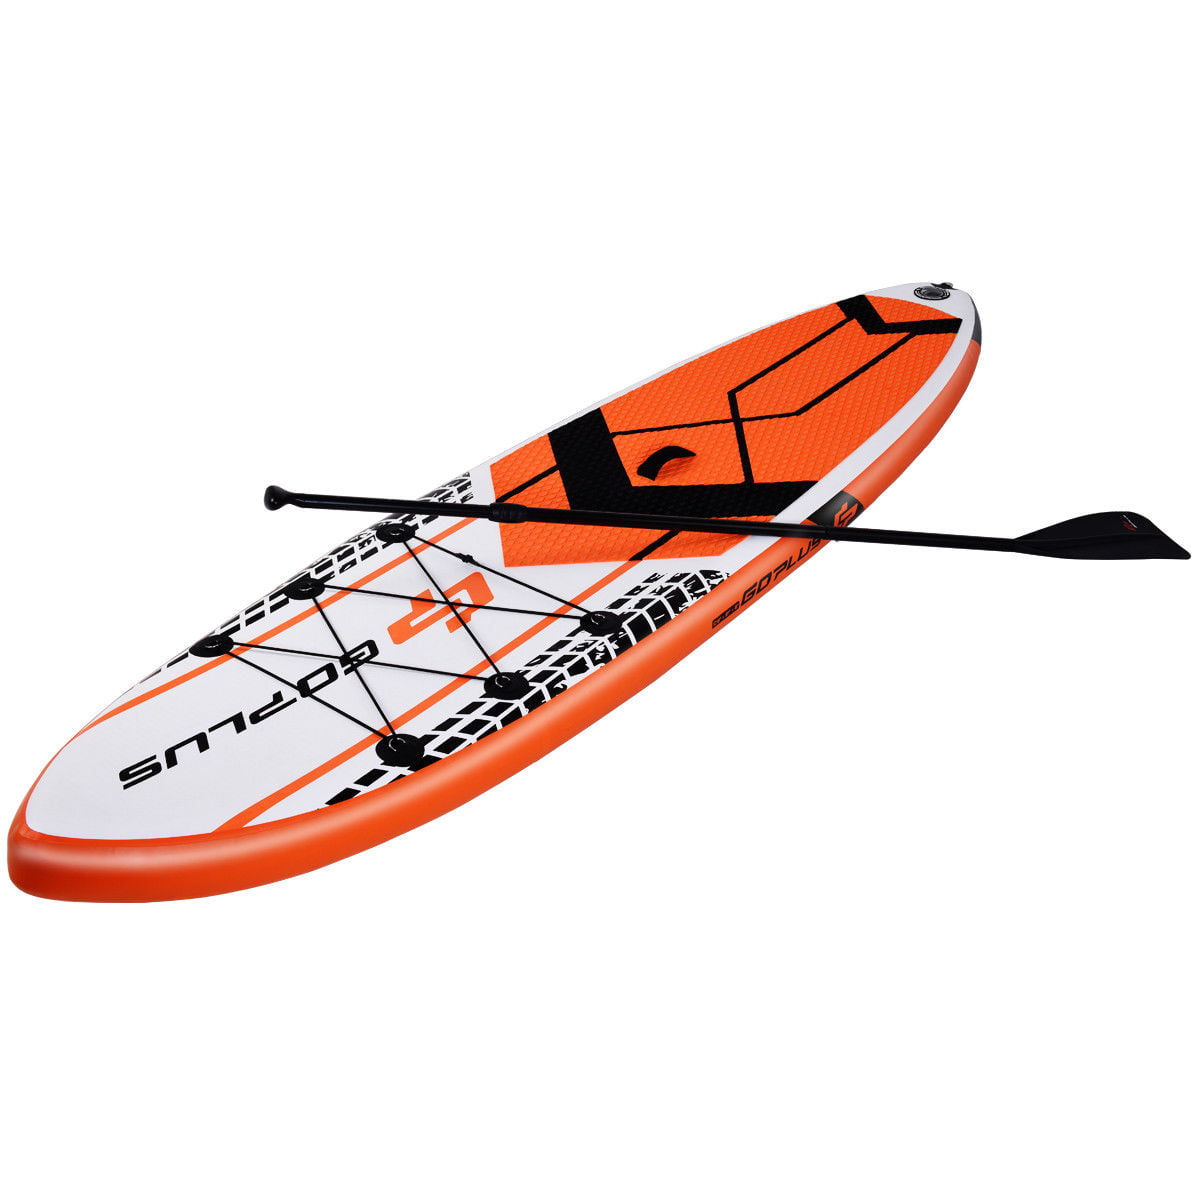 Costway Goplus 10.5' Inflatable Stand Up Paddle Board SUP W/ Fin ...